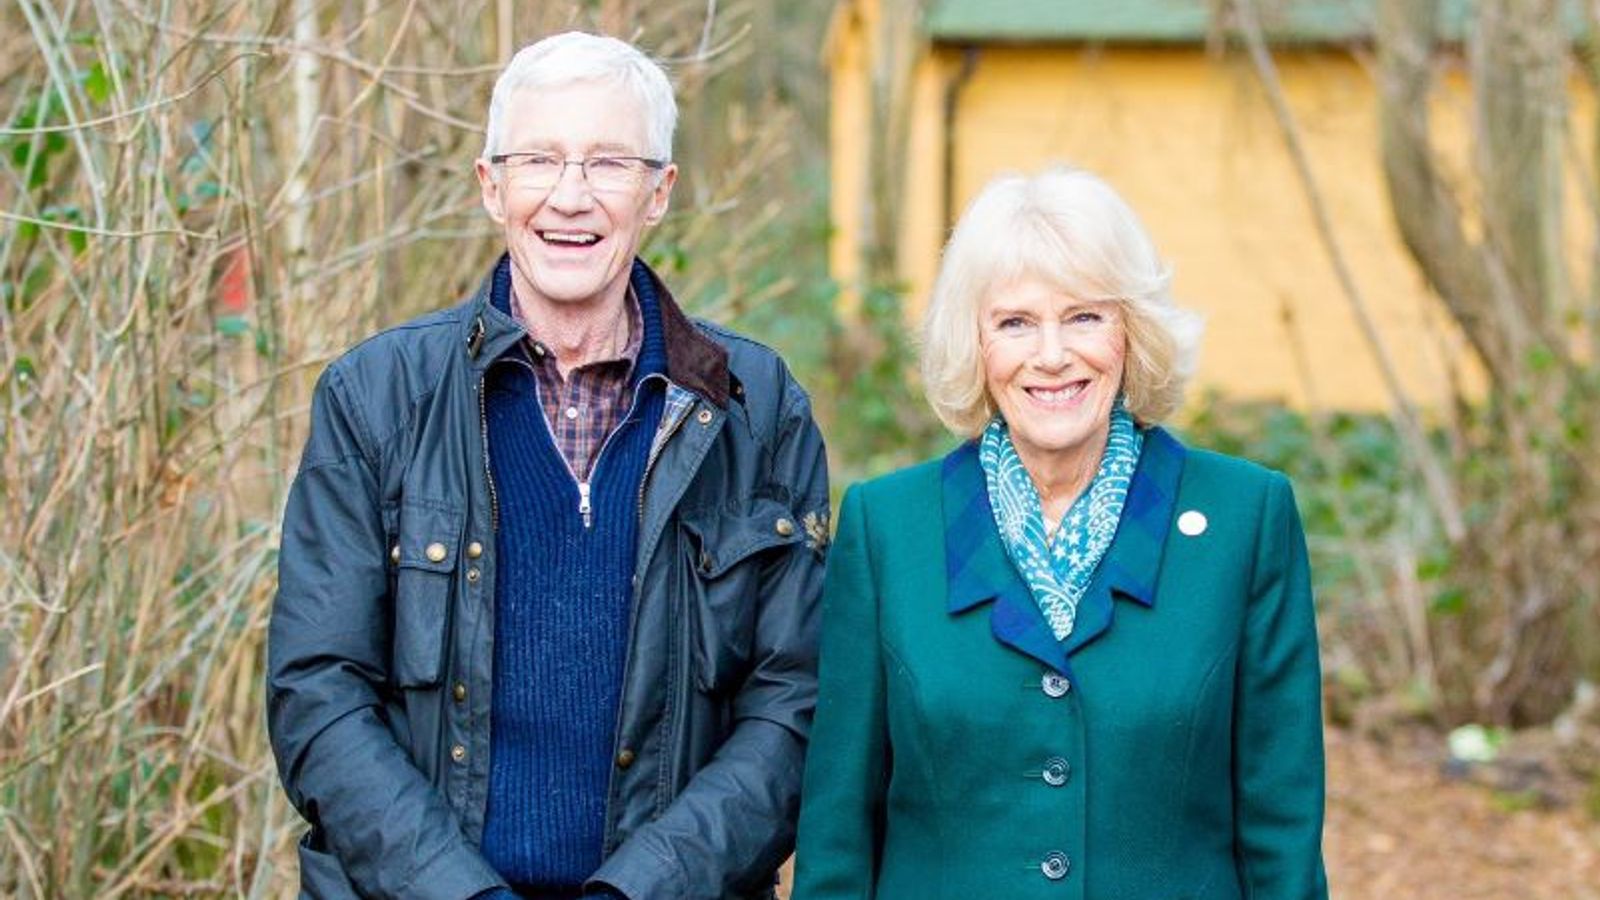 Paul O'Grady death: Tributes pour in for 'brilliant' comedian and 'fearless' campaigner